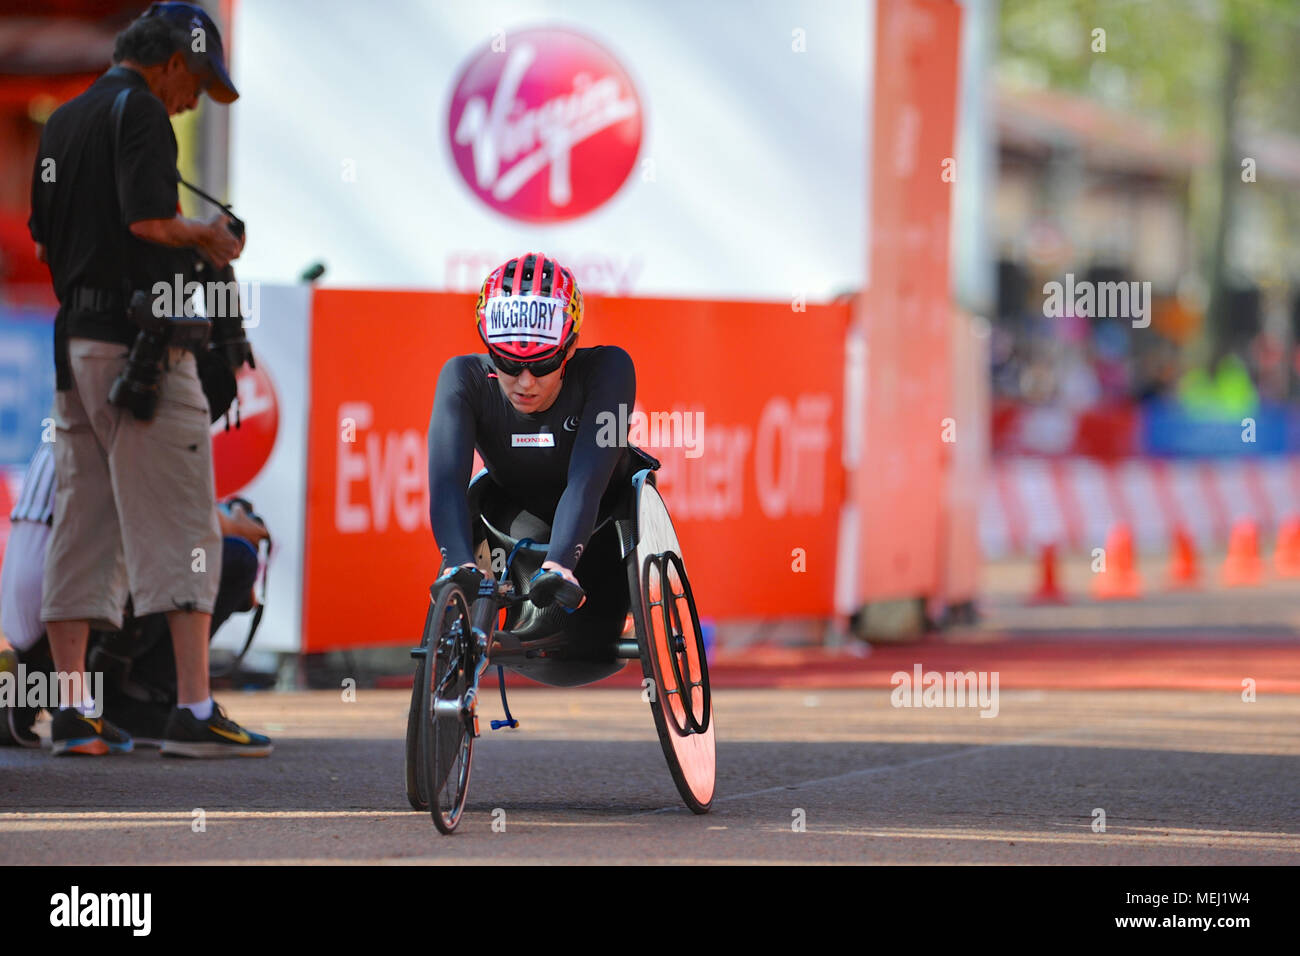 London, UK. 22nd Apr, 2018. Amanda McGrory (USA) crossing the finish line on The Mall during the Virgin Money London Marathon Women’s Wheelchair race, The Mall, London, United Kingdom.  McGrory finished in 5th place with a time of 1:43:04. Credit: Michael Preston/Alamy Live News Stock Photo